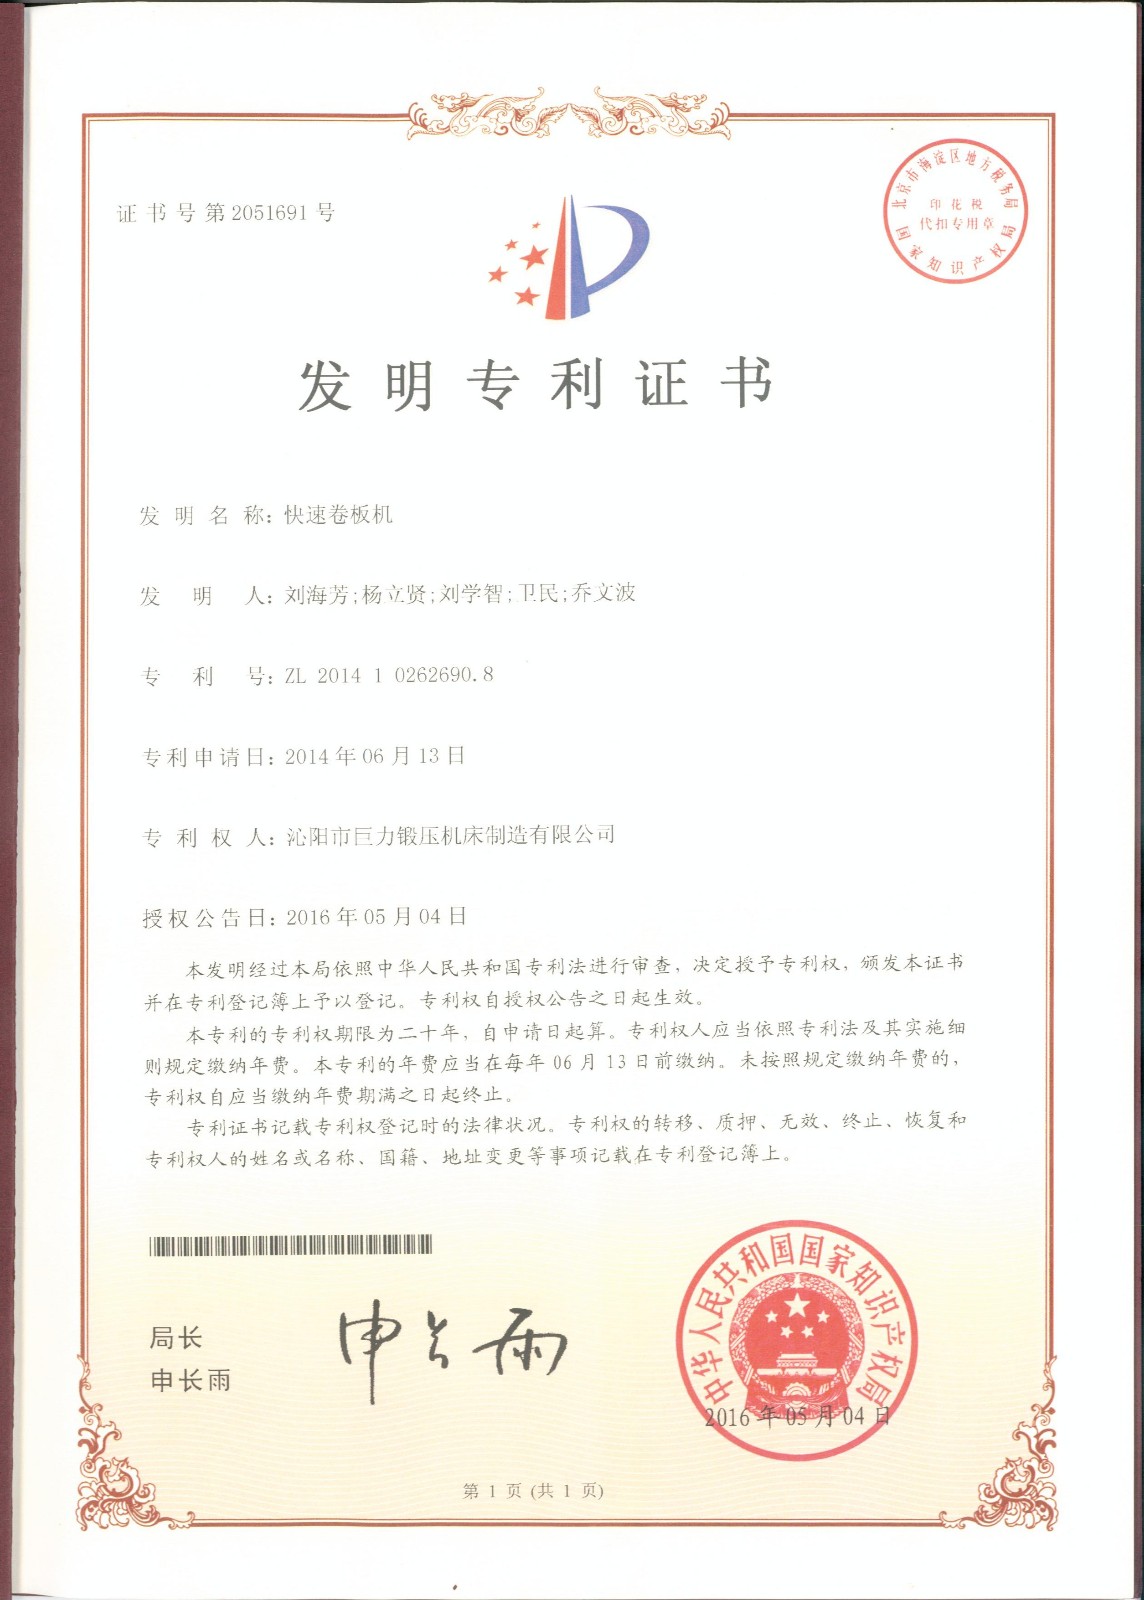 Fast coiling machine invention patent certificate